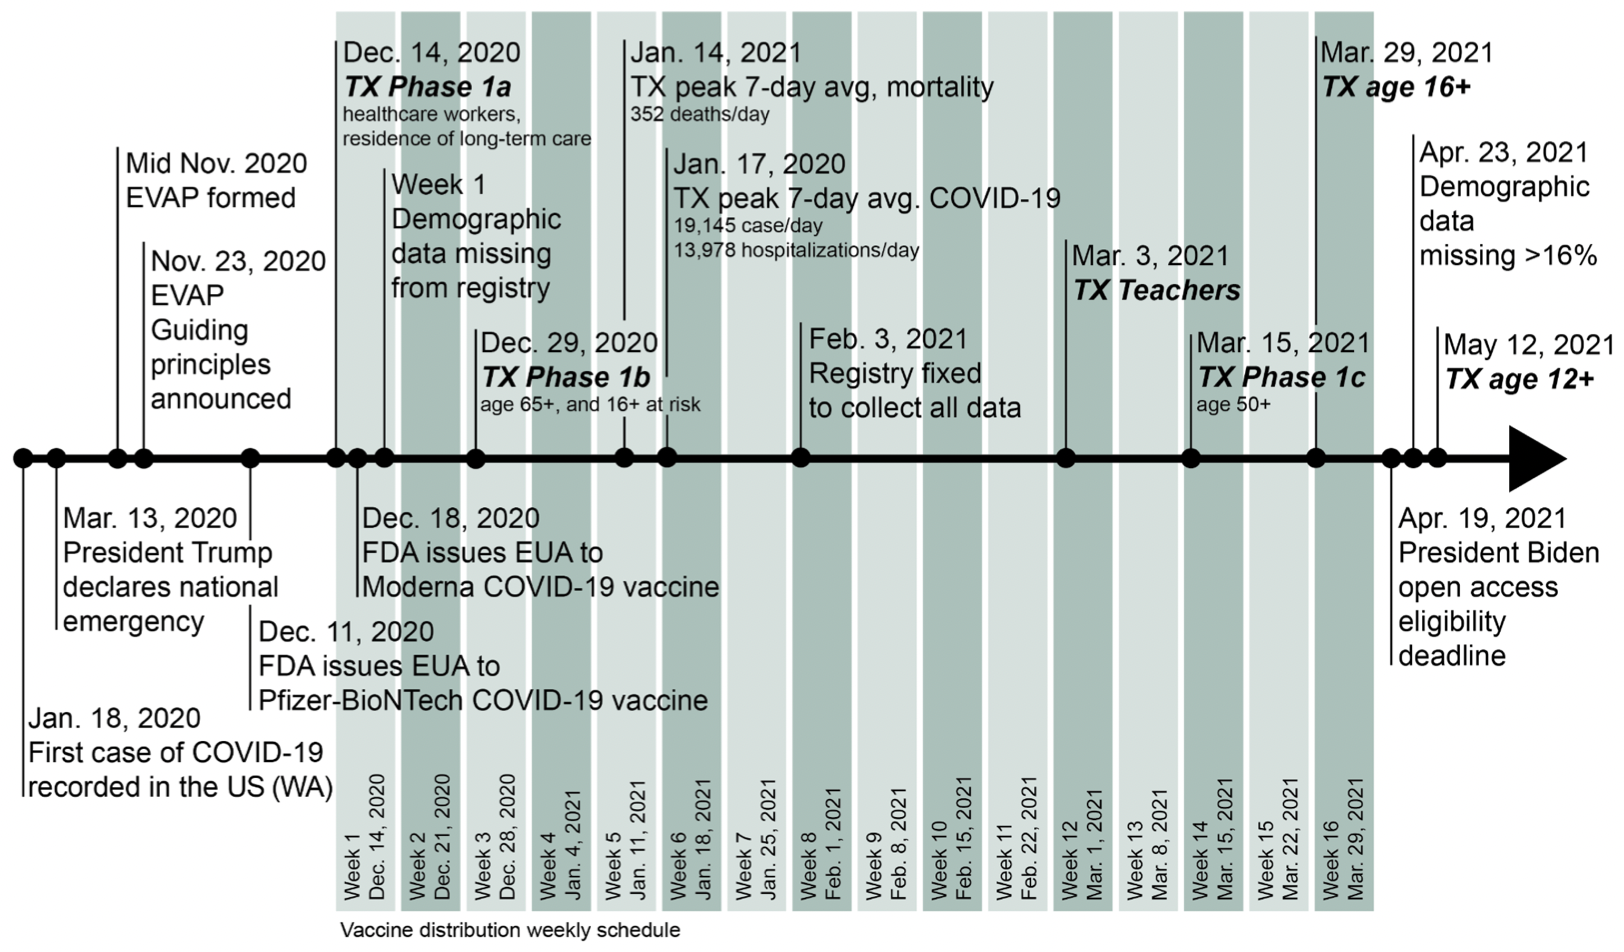 This timeline shows key dates in the U.S. COVID-19 pandemic and Texas vaccine distribution.